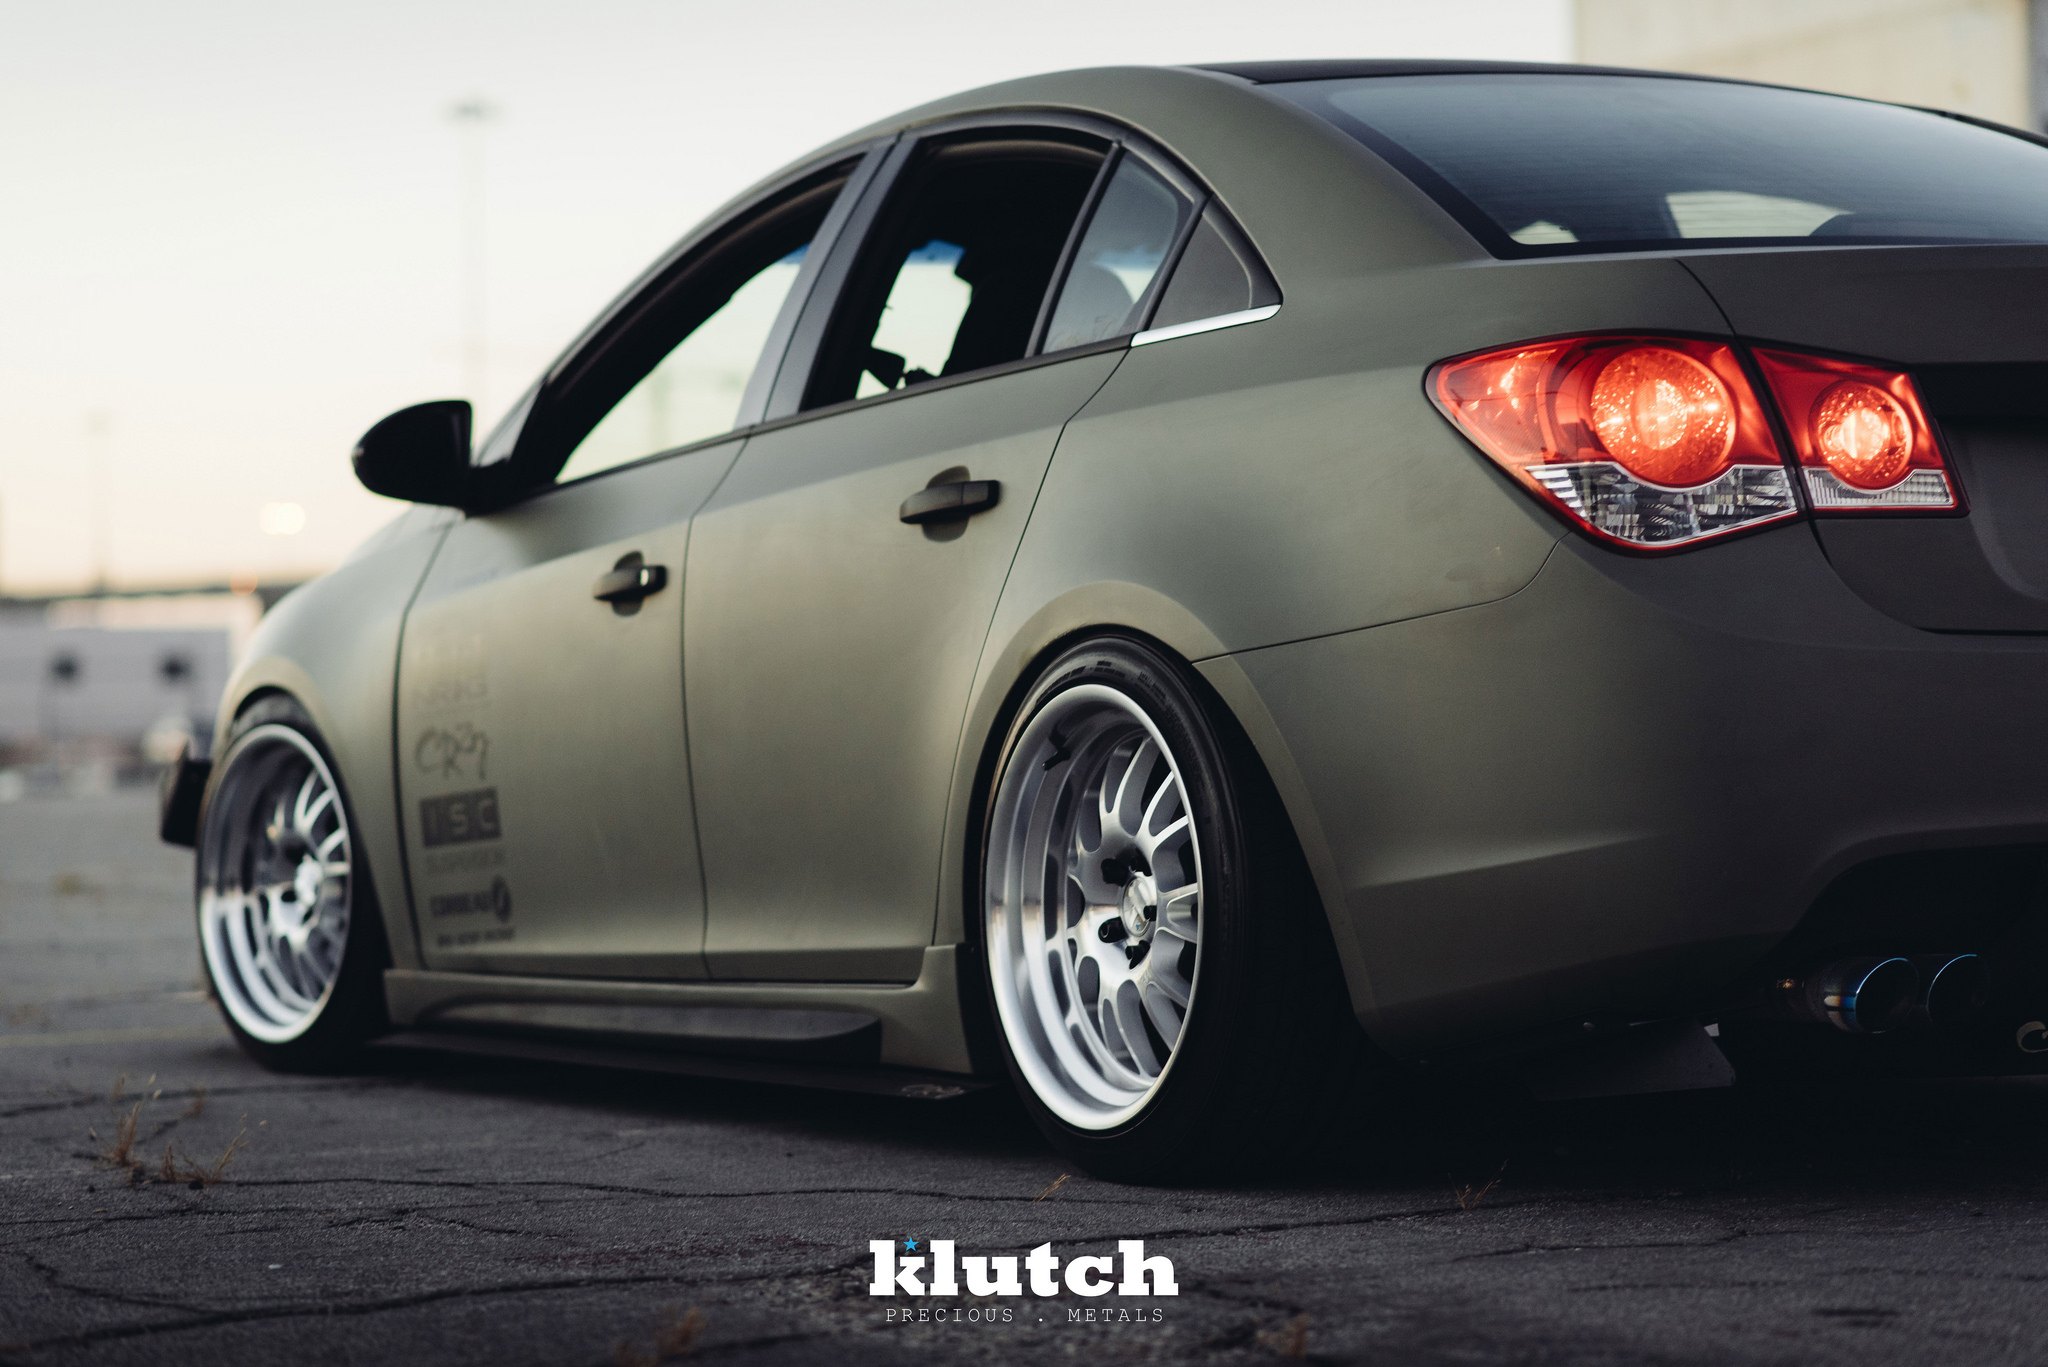 Stance Wheels With Skinny Tires - Photo by Klutch Wheels